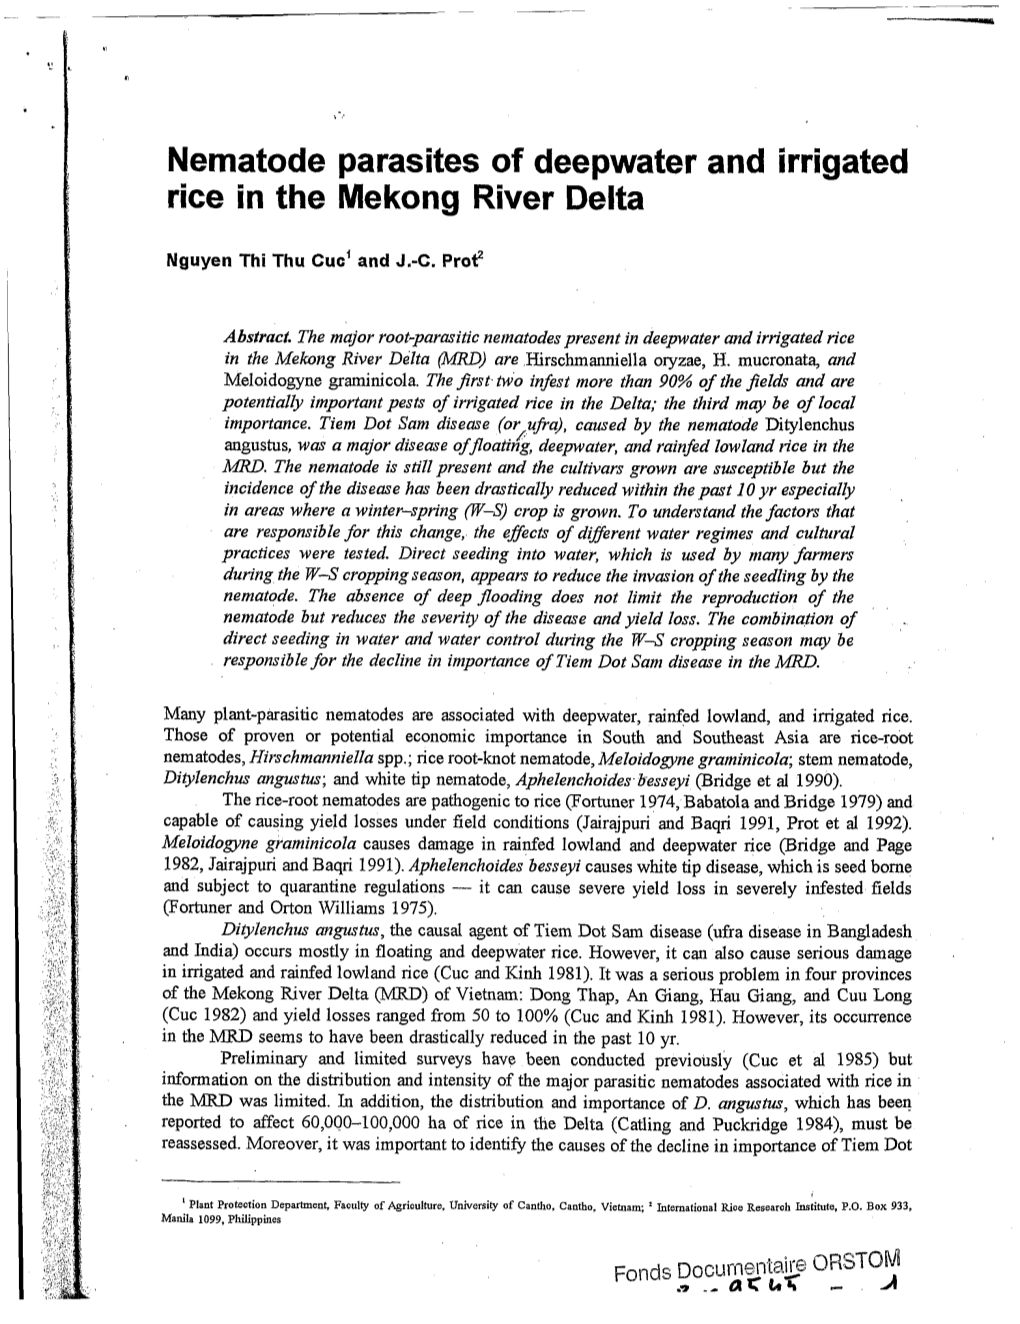 Nematode Parasites of Deepwater and Irrigated Rice in the Mekong River Delta